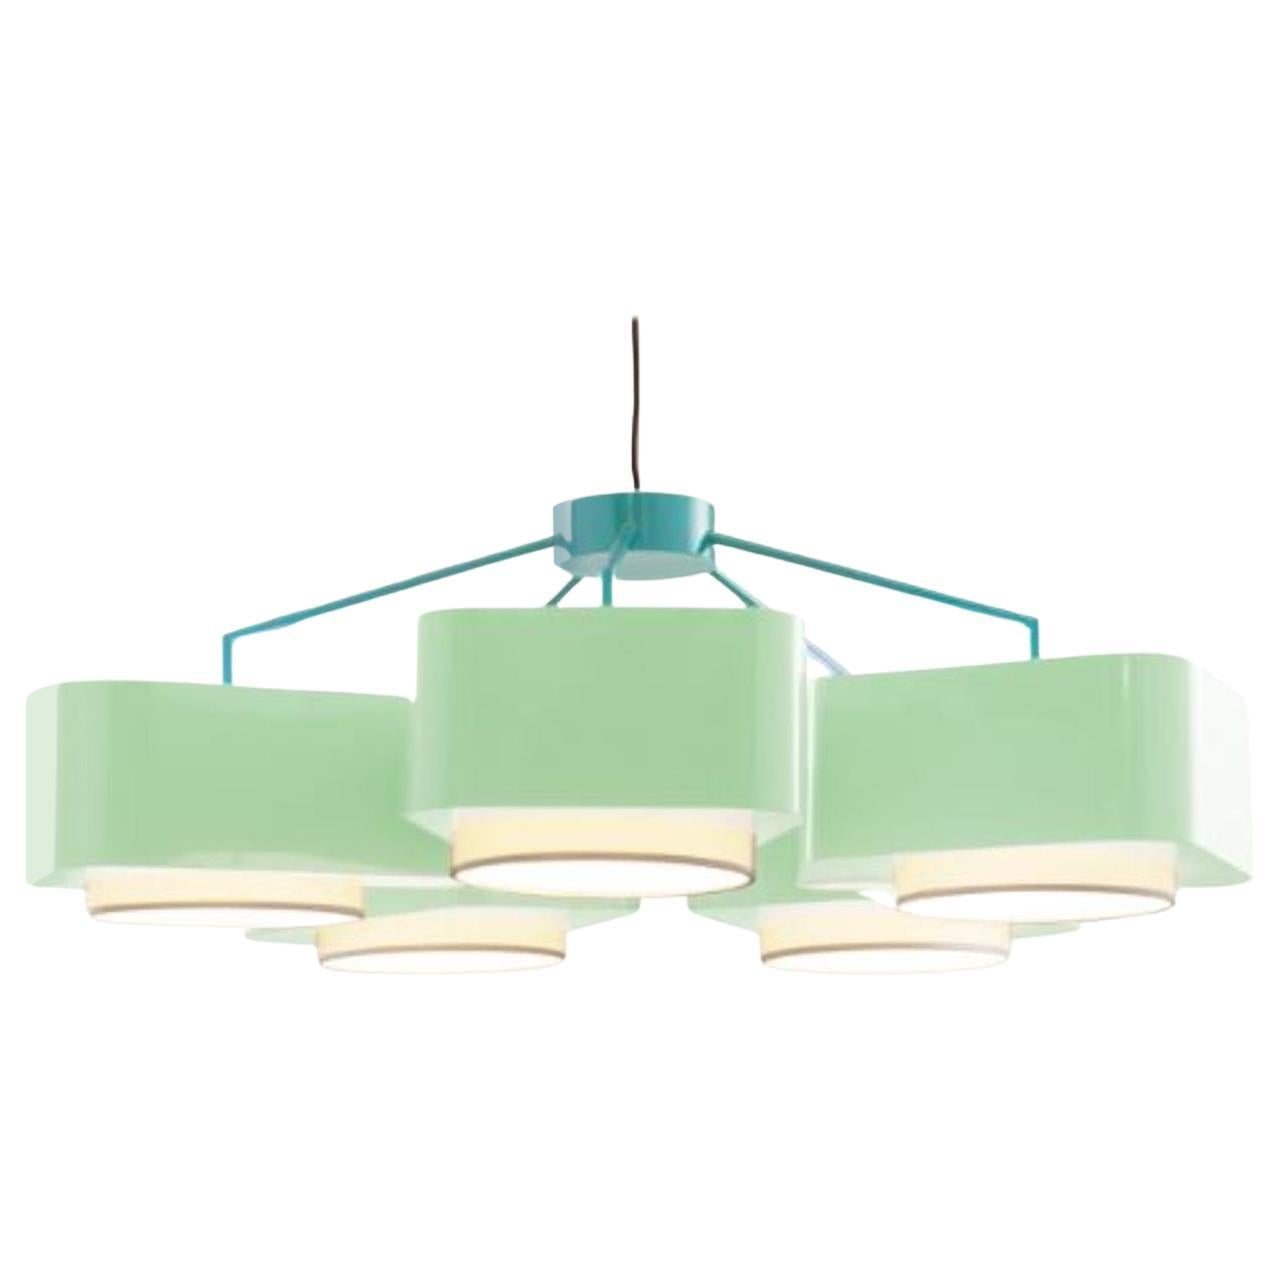 Mint and Dream Carousel Suspension Lamp by Dooq